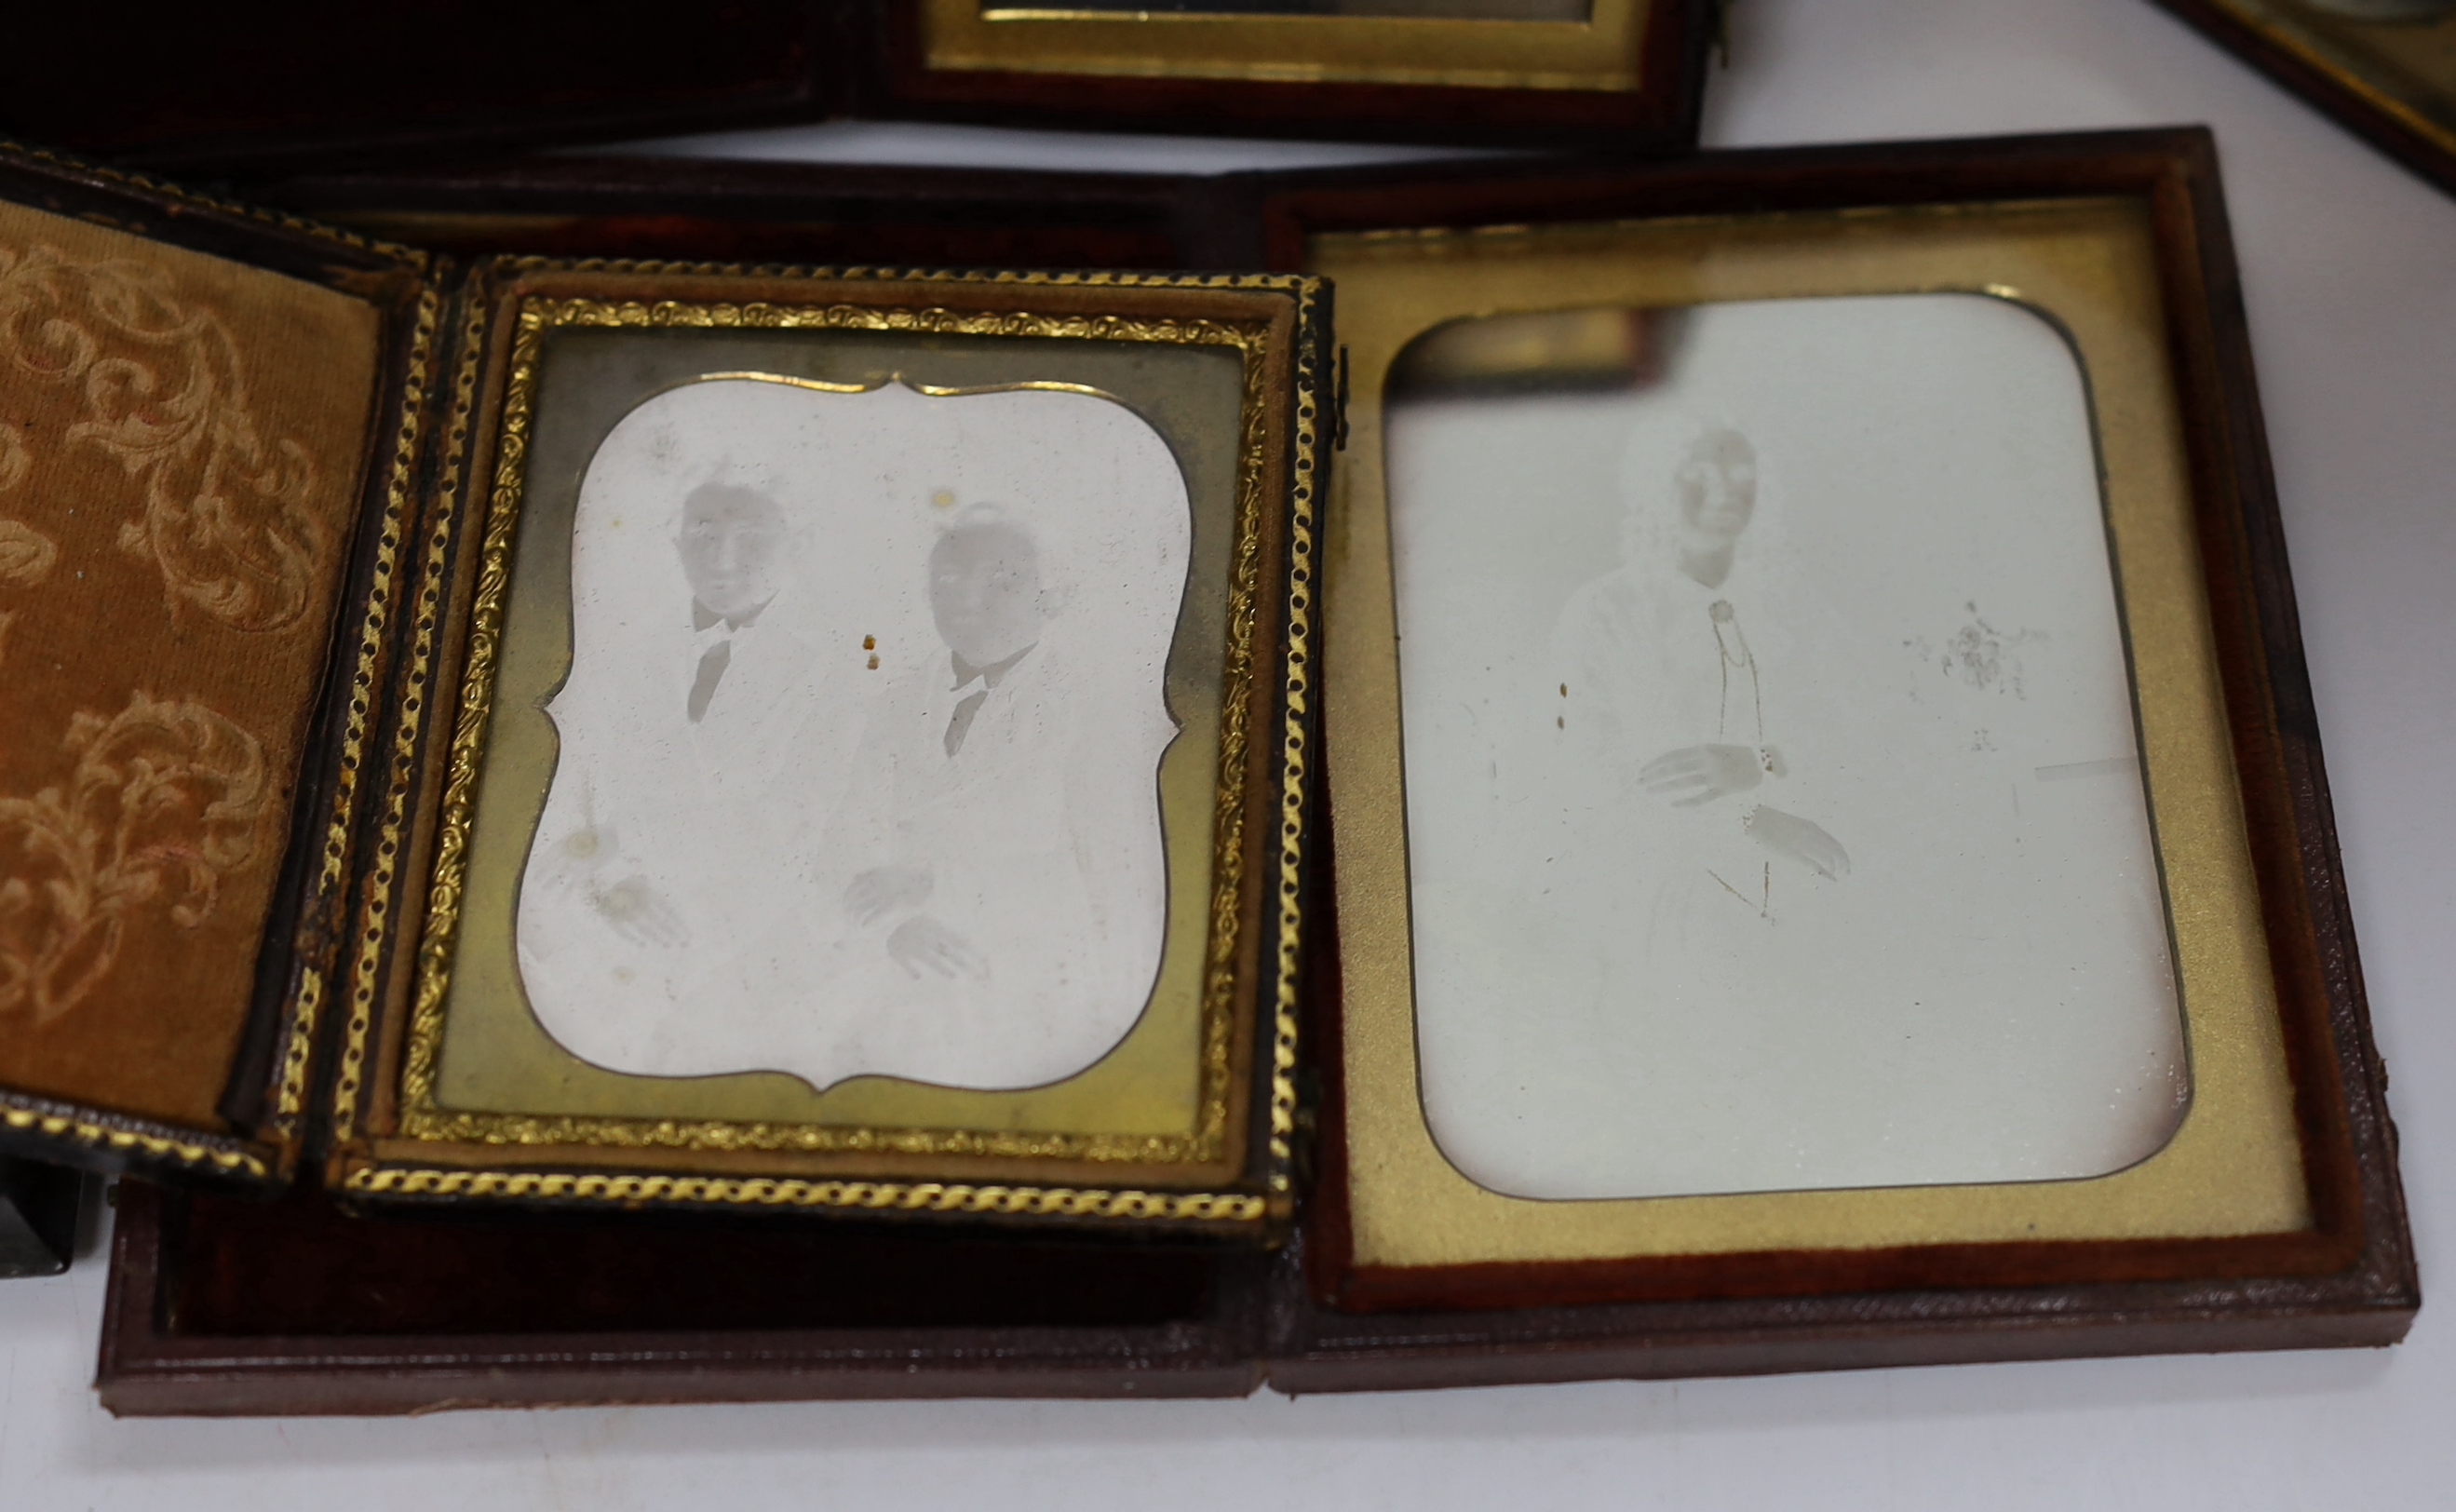 Nine mid 19th century daguerreotype portrait photographs, all mounted in brass, etc. frames, some in decorative cases, one example framed